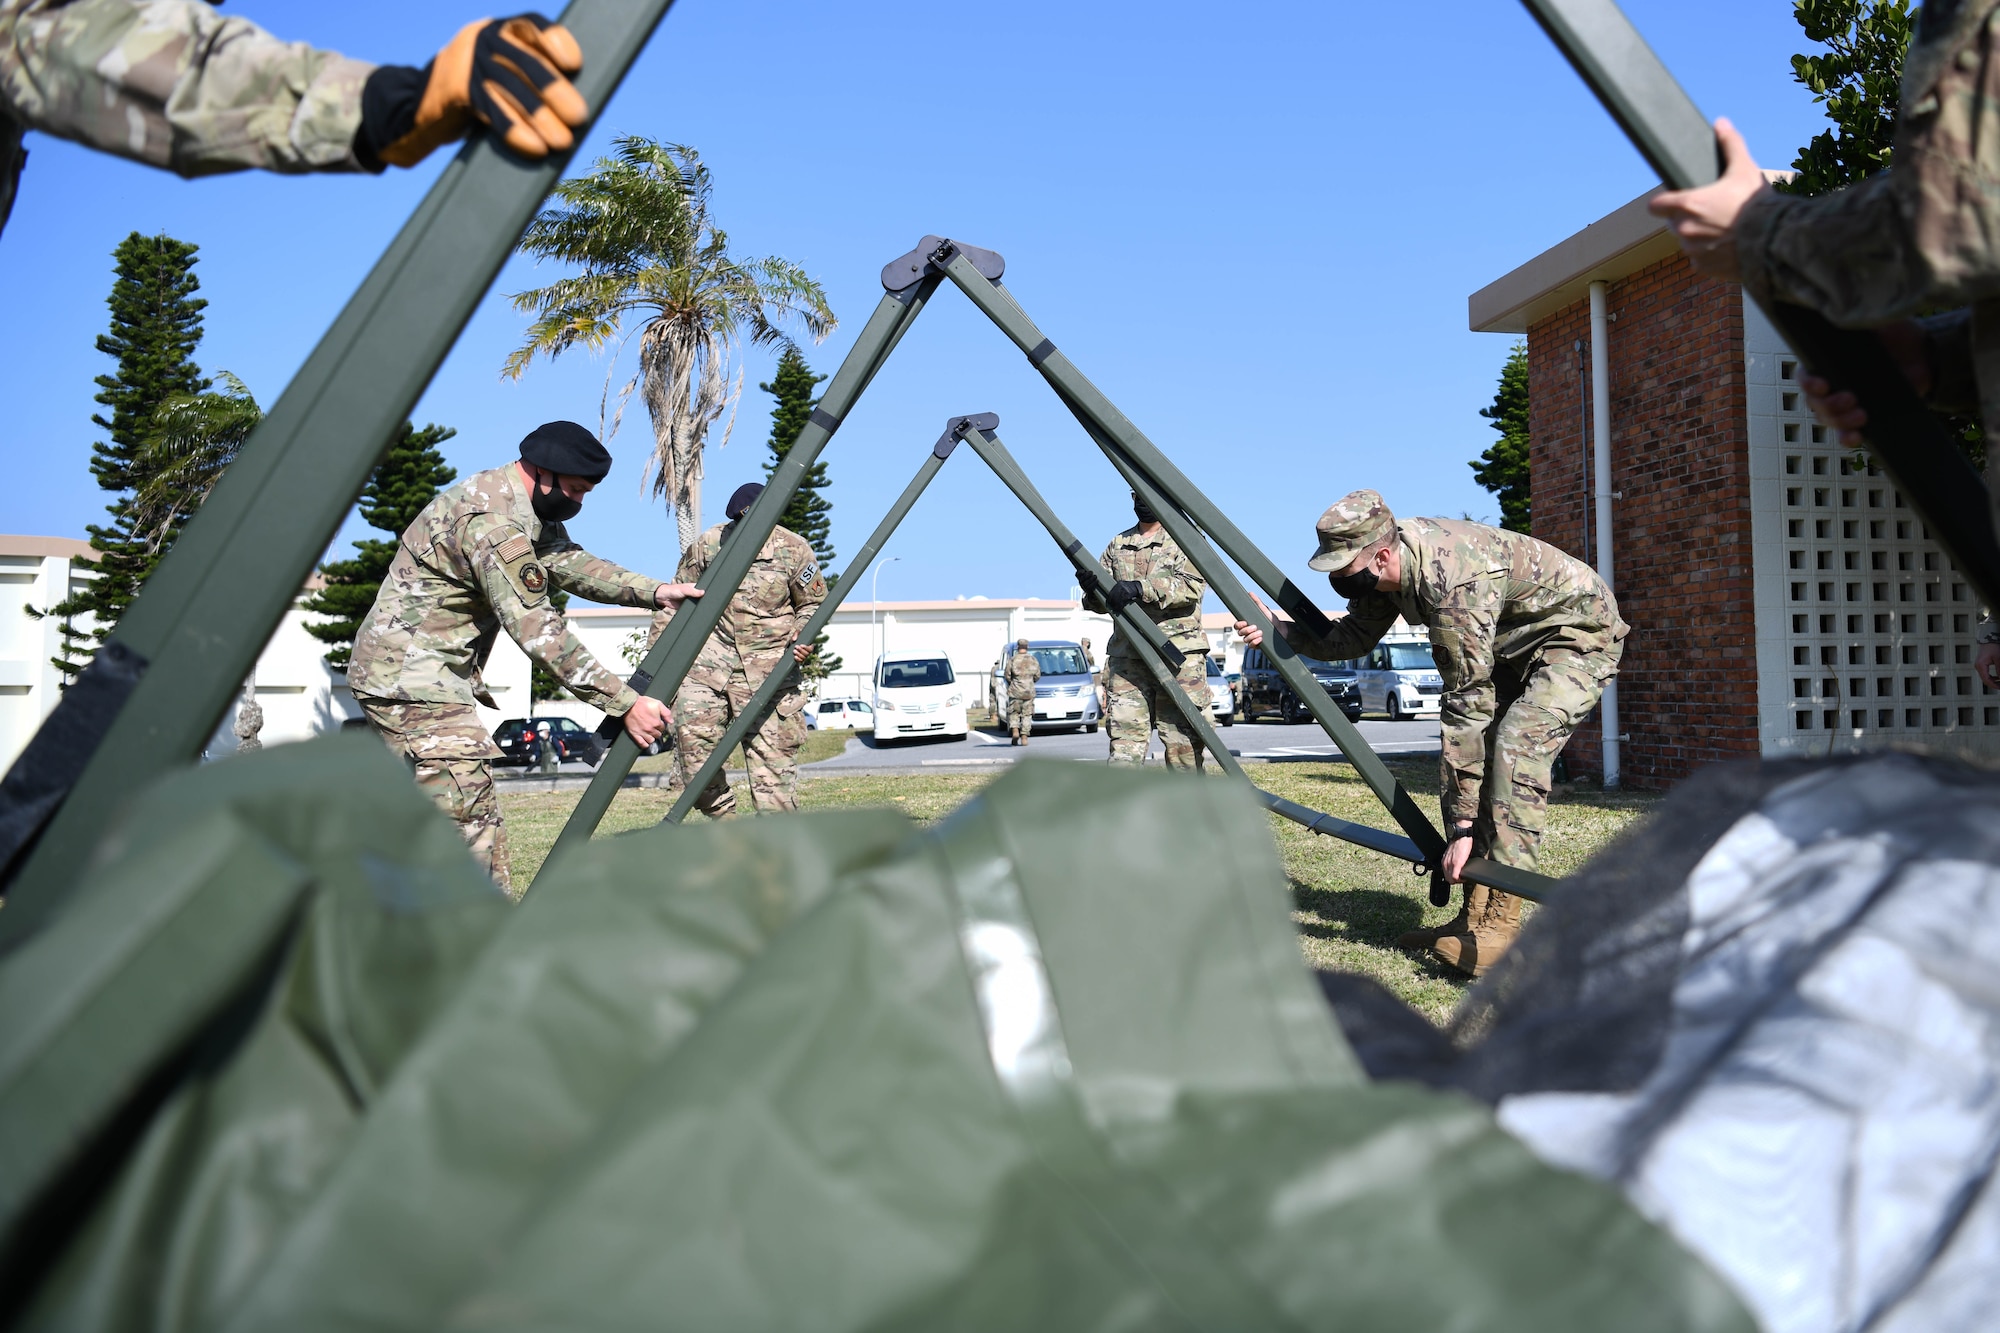 U.S. service members from the 18th Wing practice assembling a multi-use tent during a Multi-Capable Airmen course exercise, at Kadena Air Base, Japan, Feb. 24, 2021. This training is a part of the “beddown procedures” portion of the course, preparing Airmen to set up facilities in any location necessary.